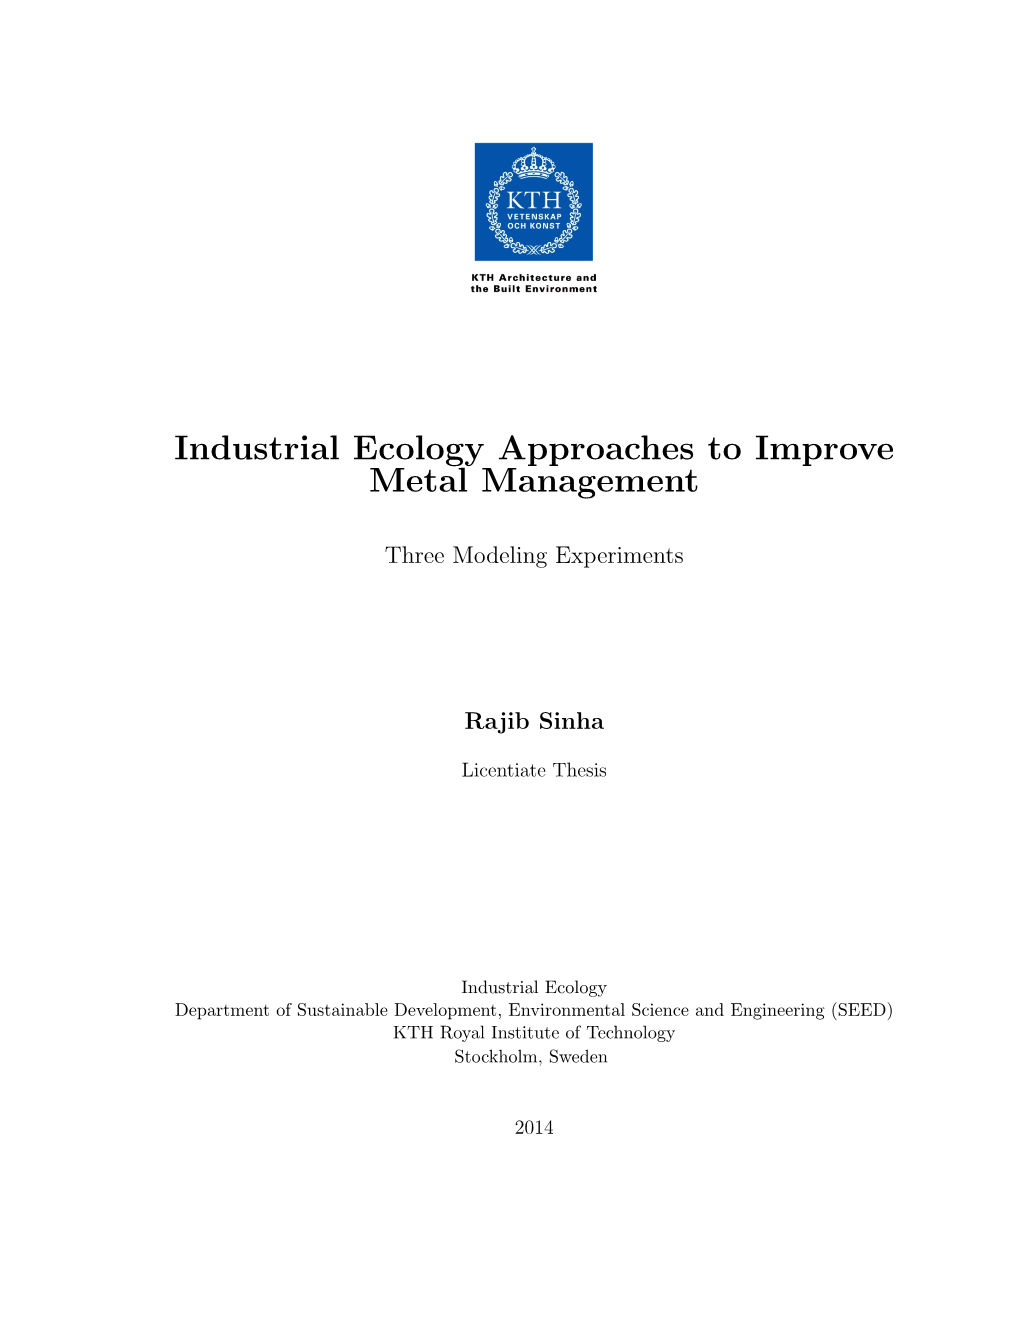 Industrial Ecology Approaches to Improve Metal Management